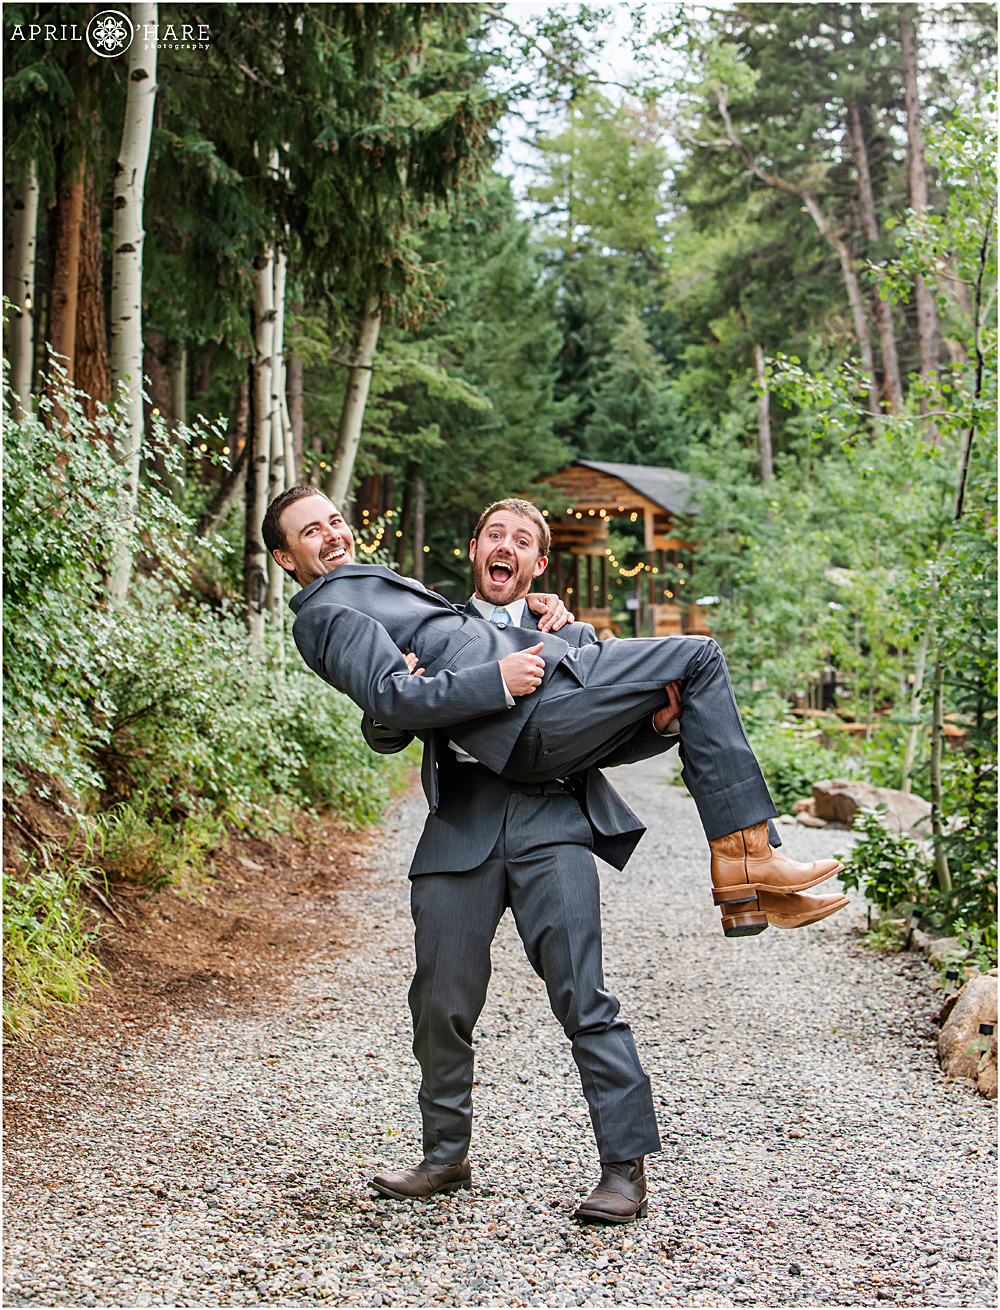 Groom and his brother who is the best man pose for a silly photo together